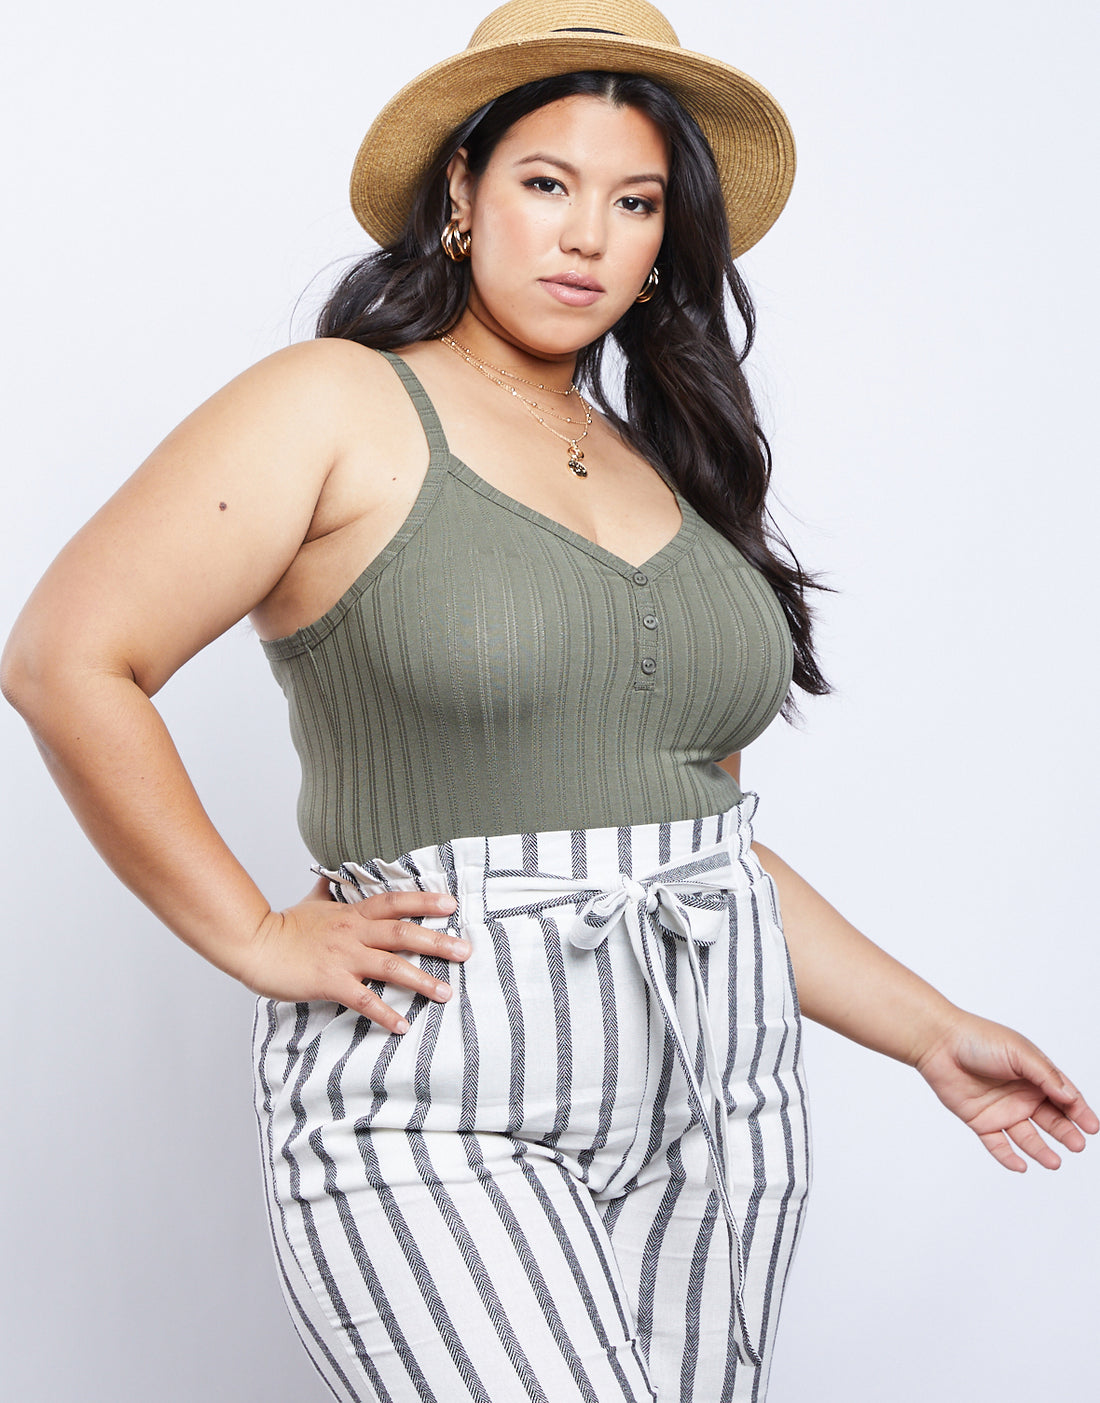 Curve Racer Back Tank Plus Size Tops Army Green 1XL -2020AVE